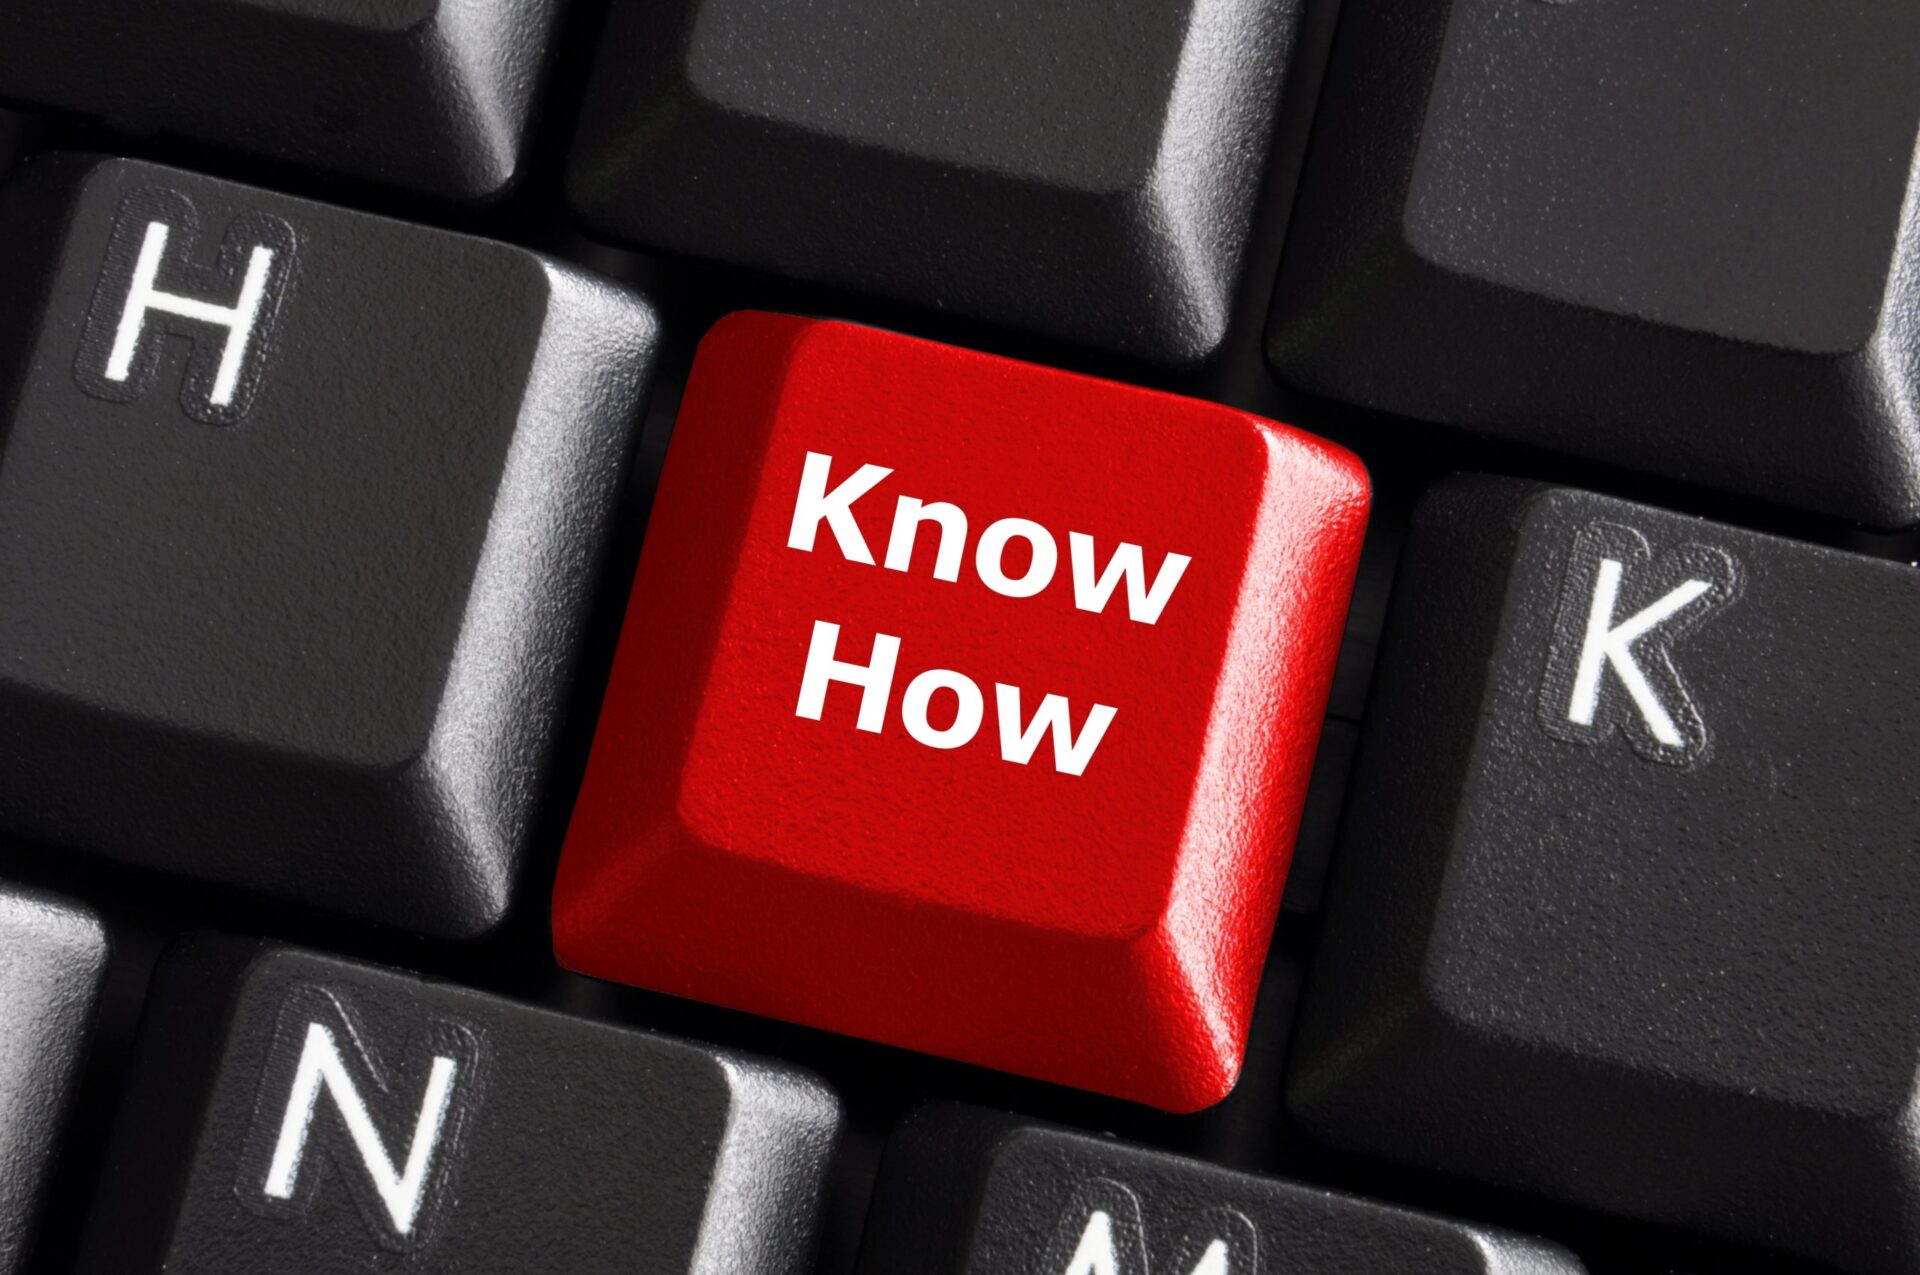 Photo of a keyboard key that says 'Know How'